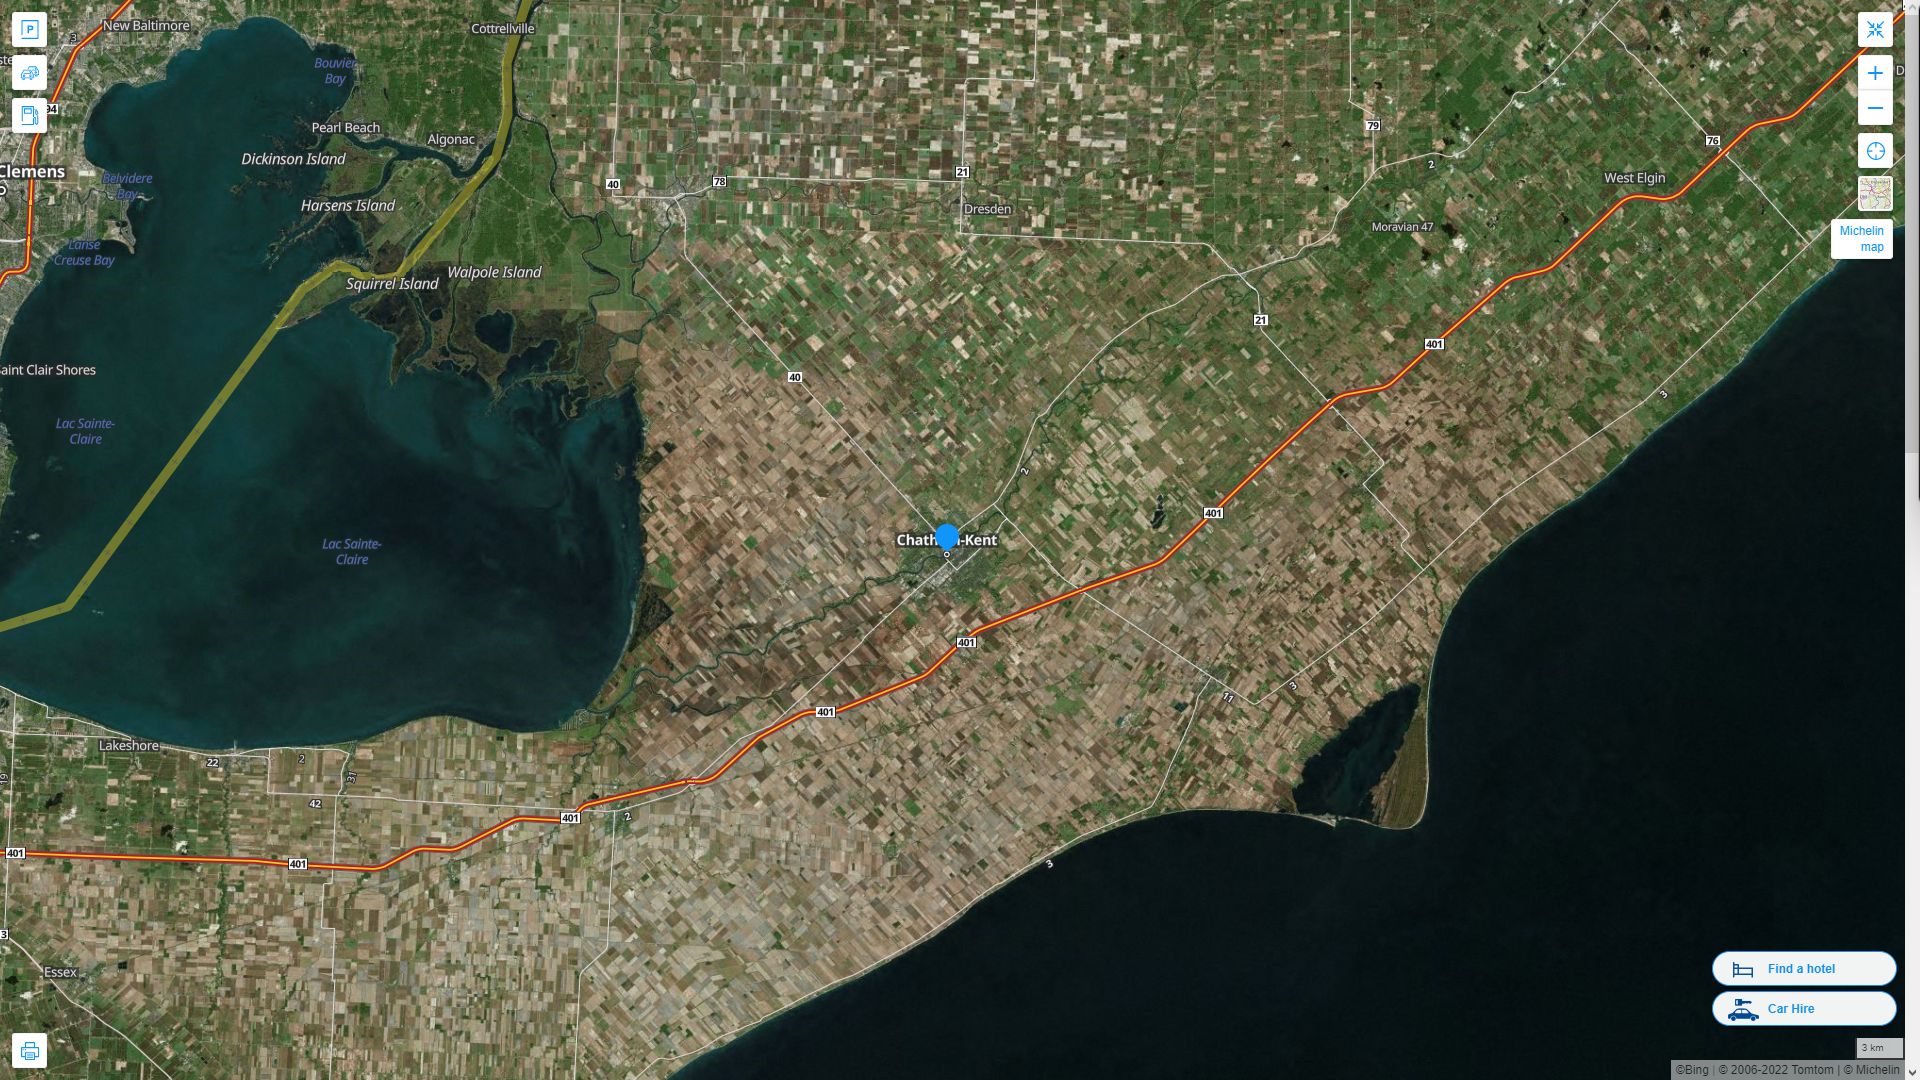 Chatham Highway and Road Map with Satellite View